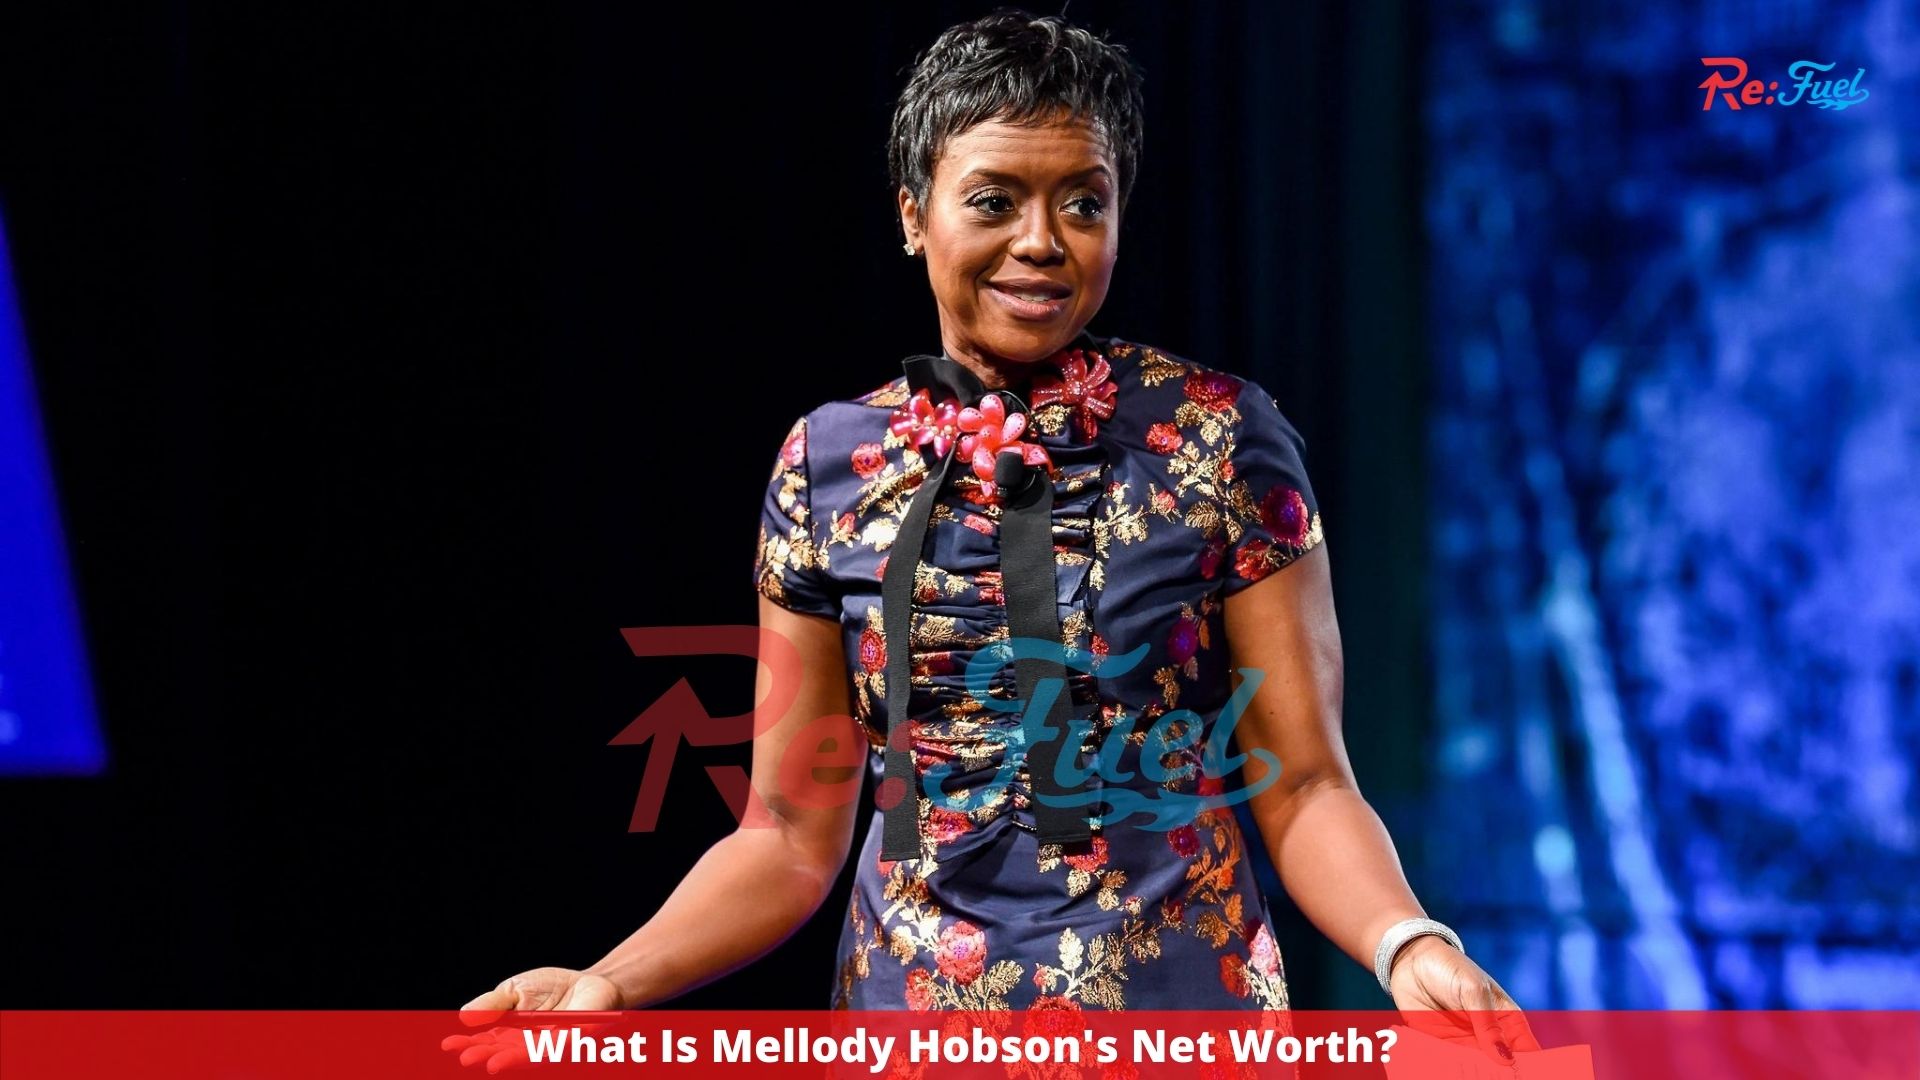 What Is Mellody Hobson's Net Worth?